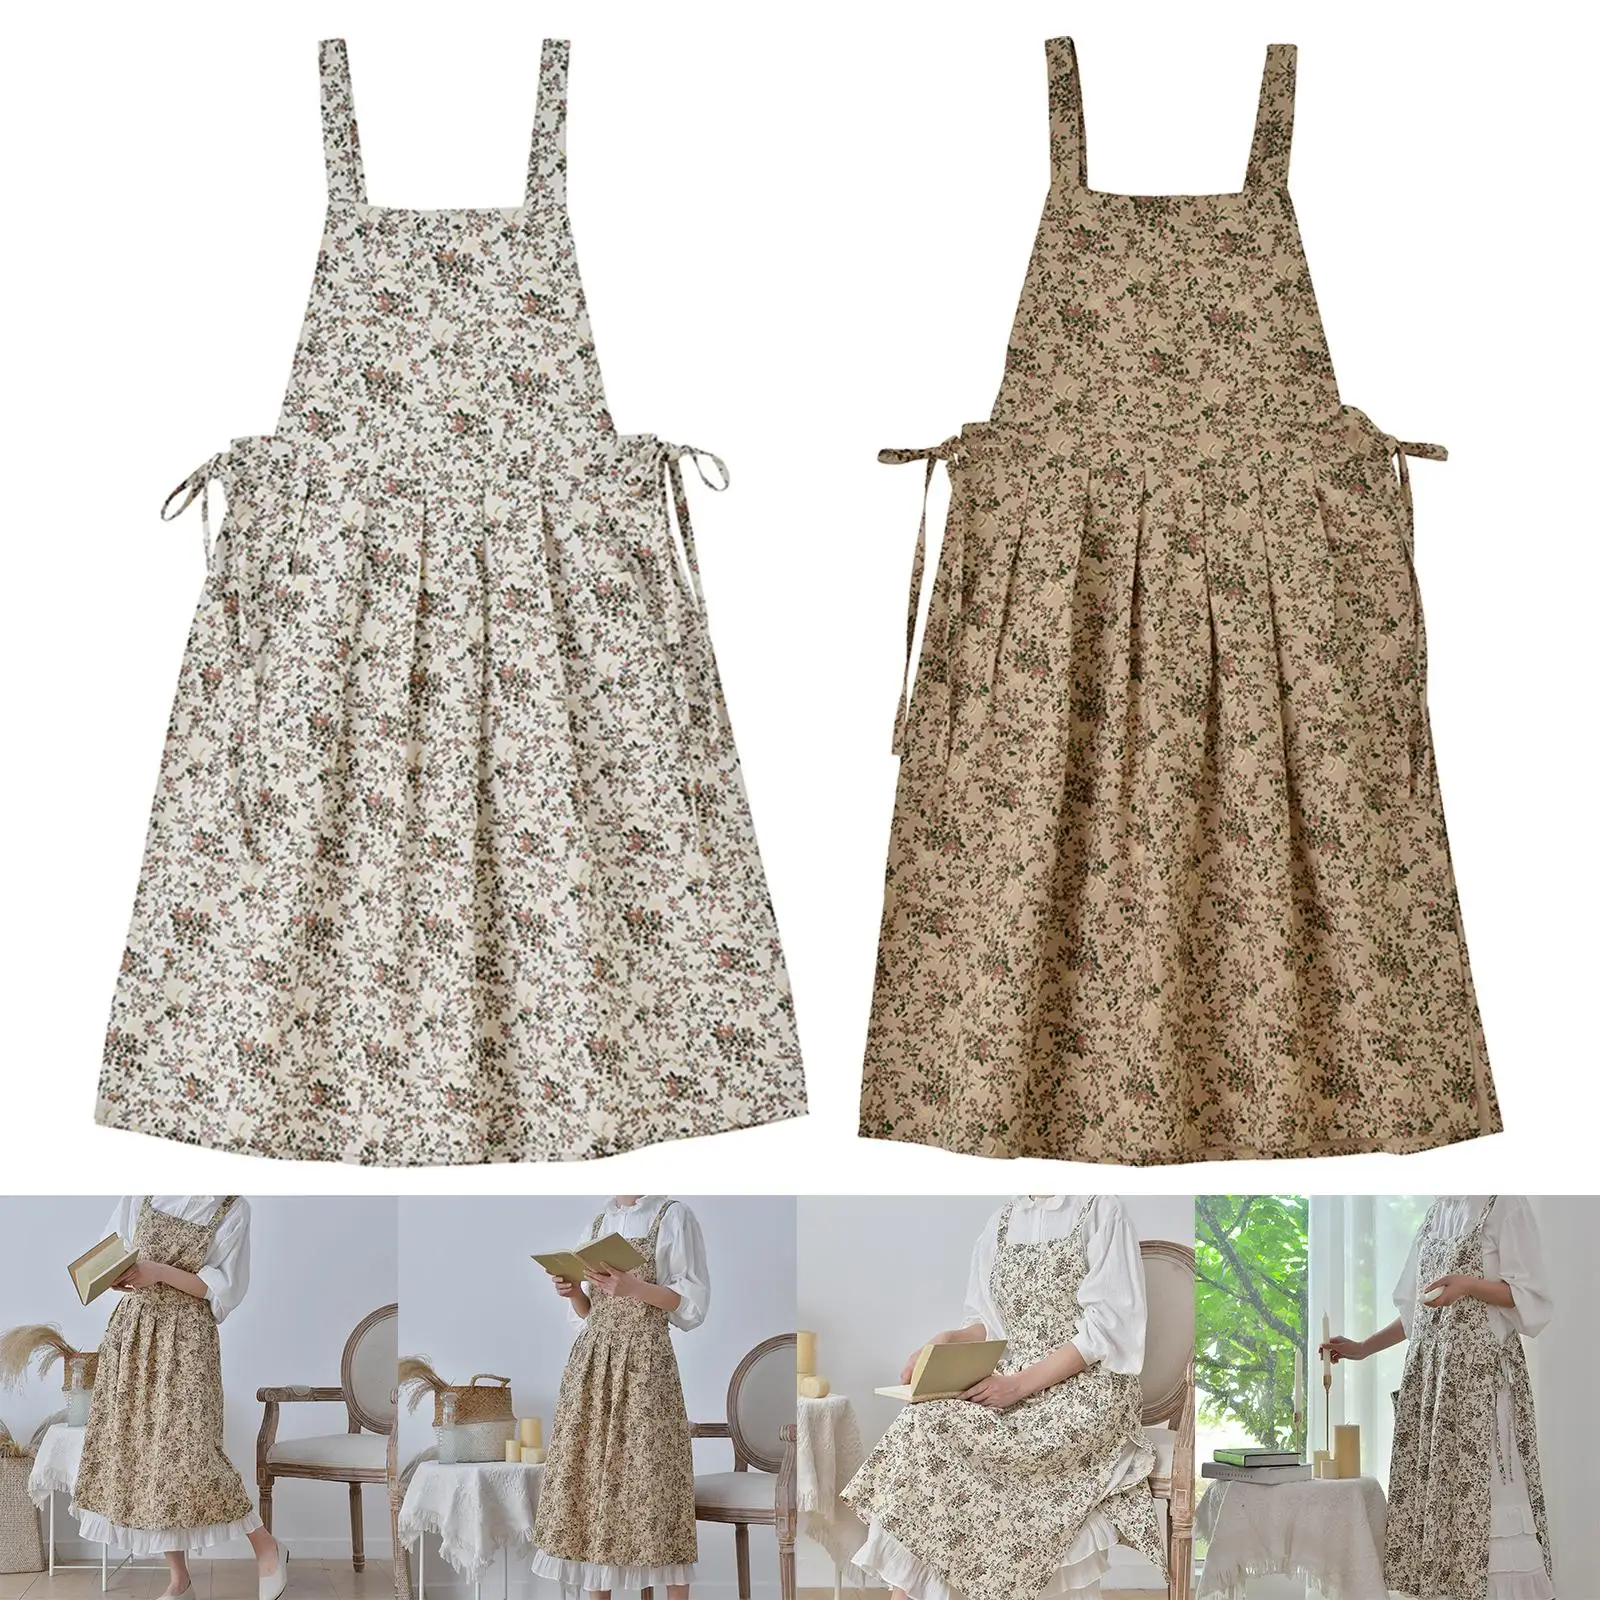 Adjustable Kitchen Apron Barista Apron Pinafore Dress Waterproof Cooking Gardening Painting for Kitchen Hotel Farmhouse Woman